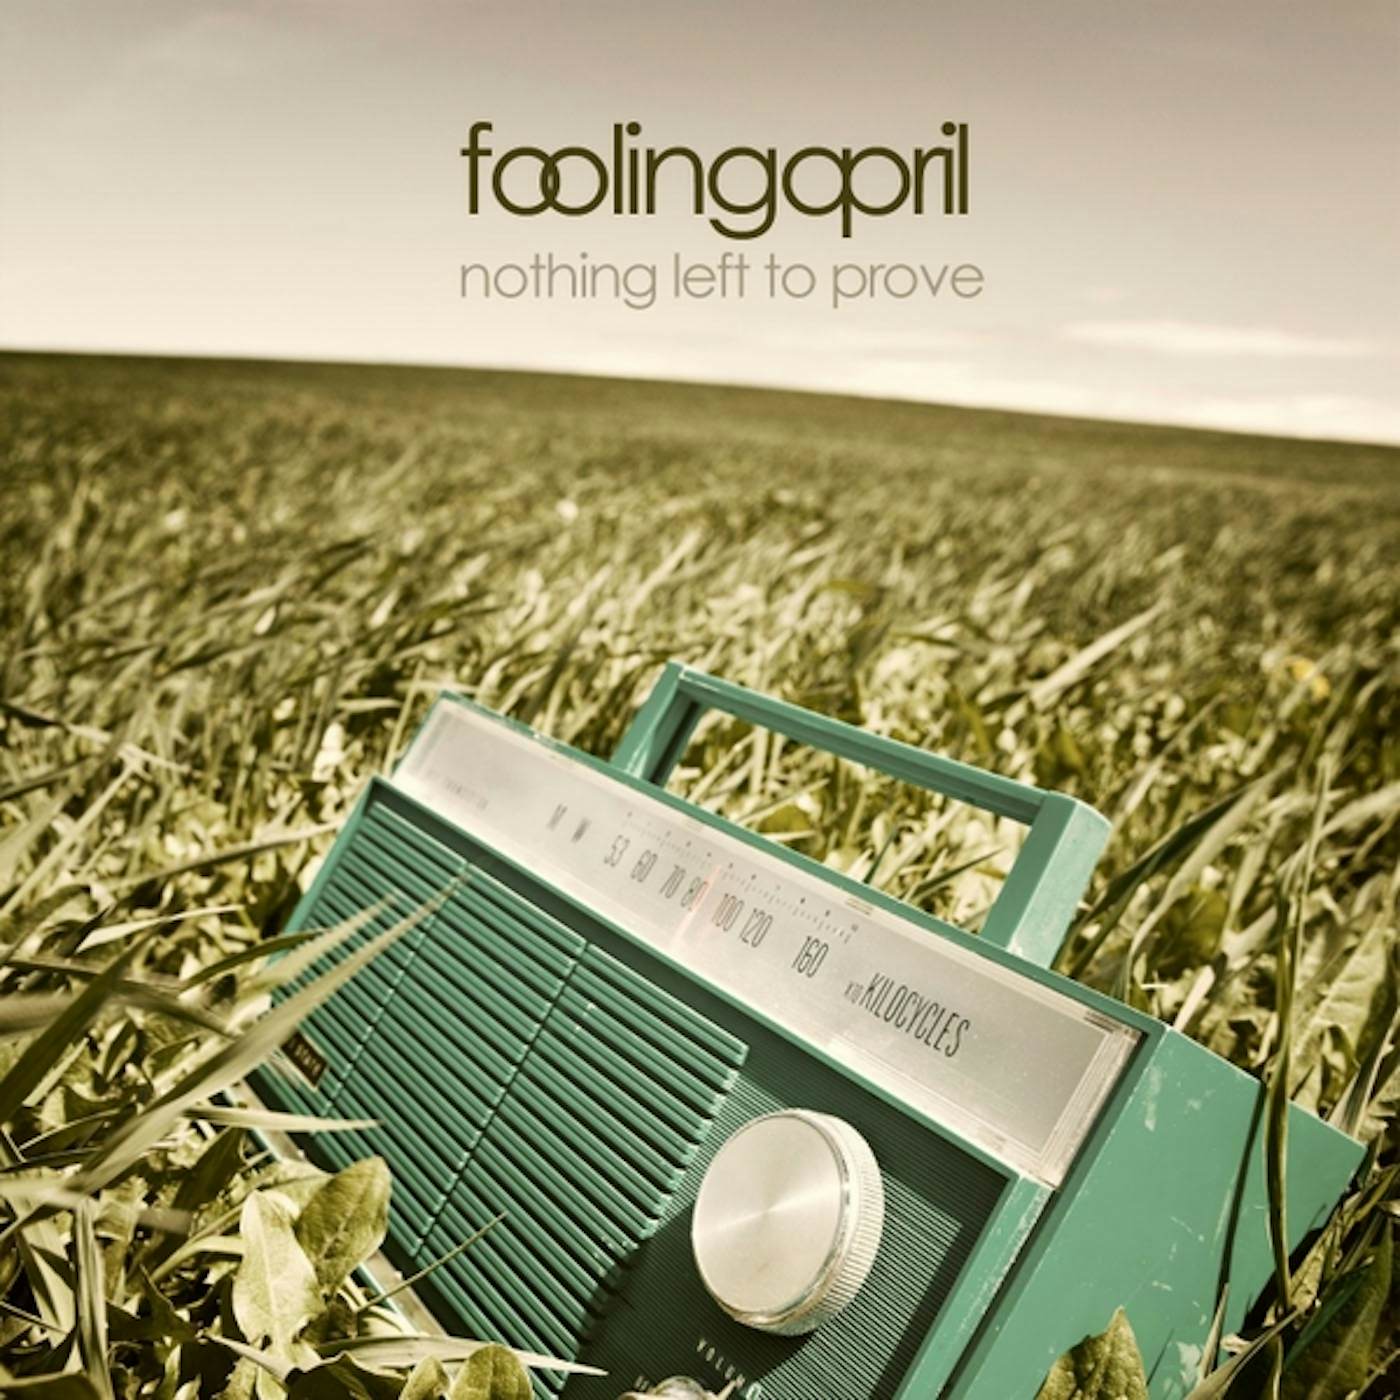 Fooling April NOTHING LEFT TO PROVE CD